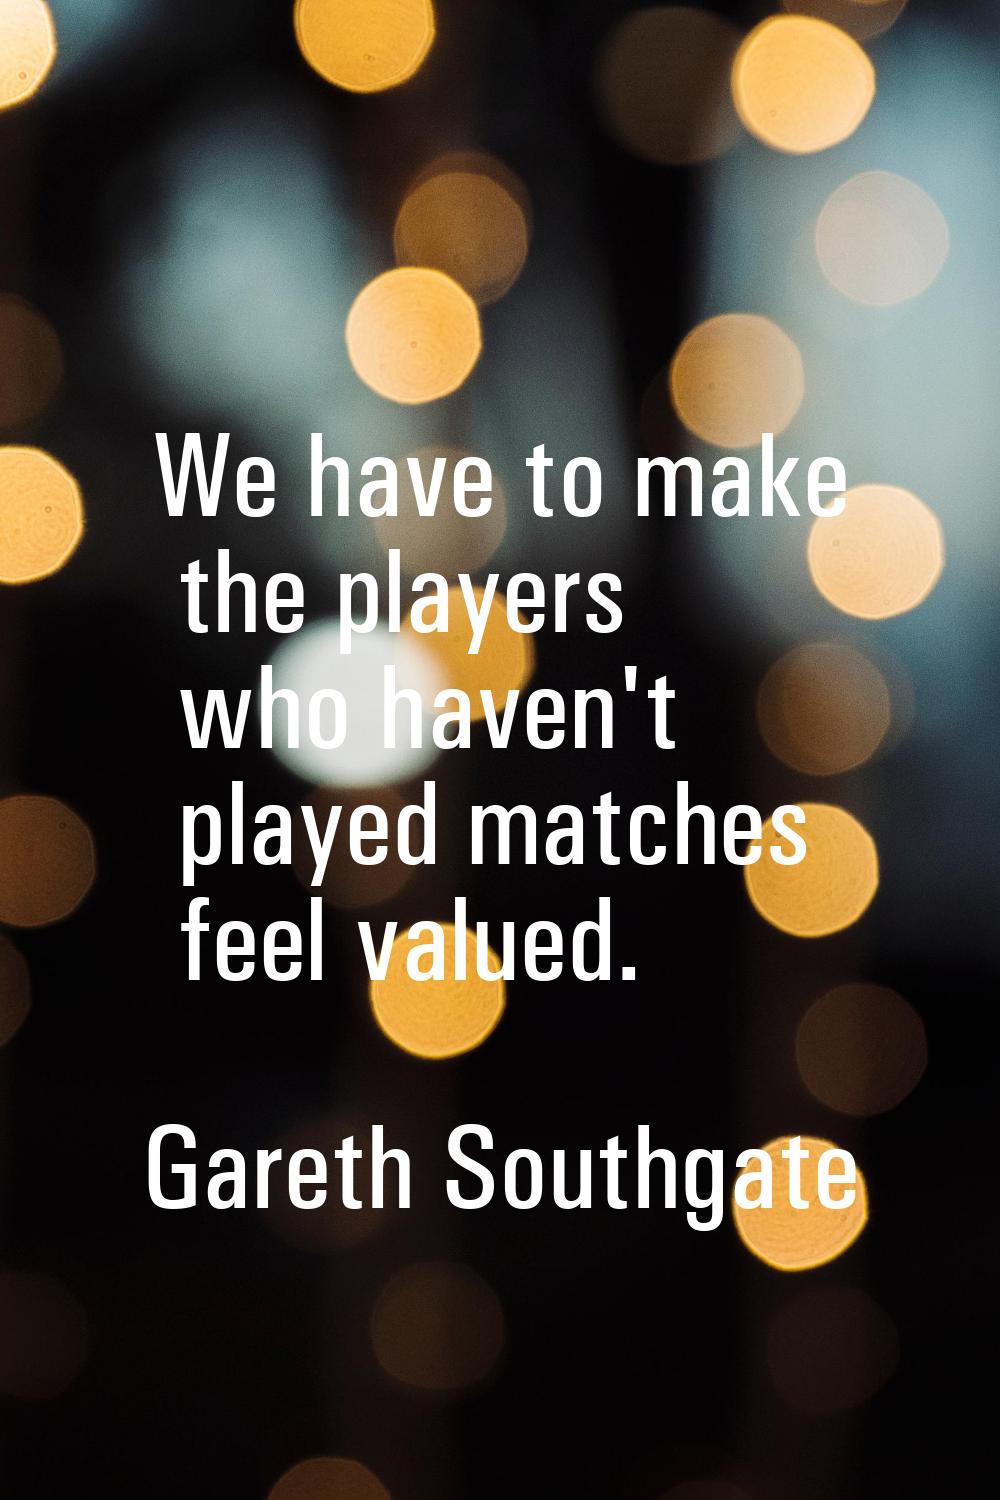 We have to make the players who haven't played matches feel valued.